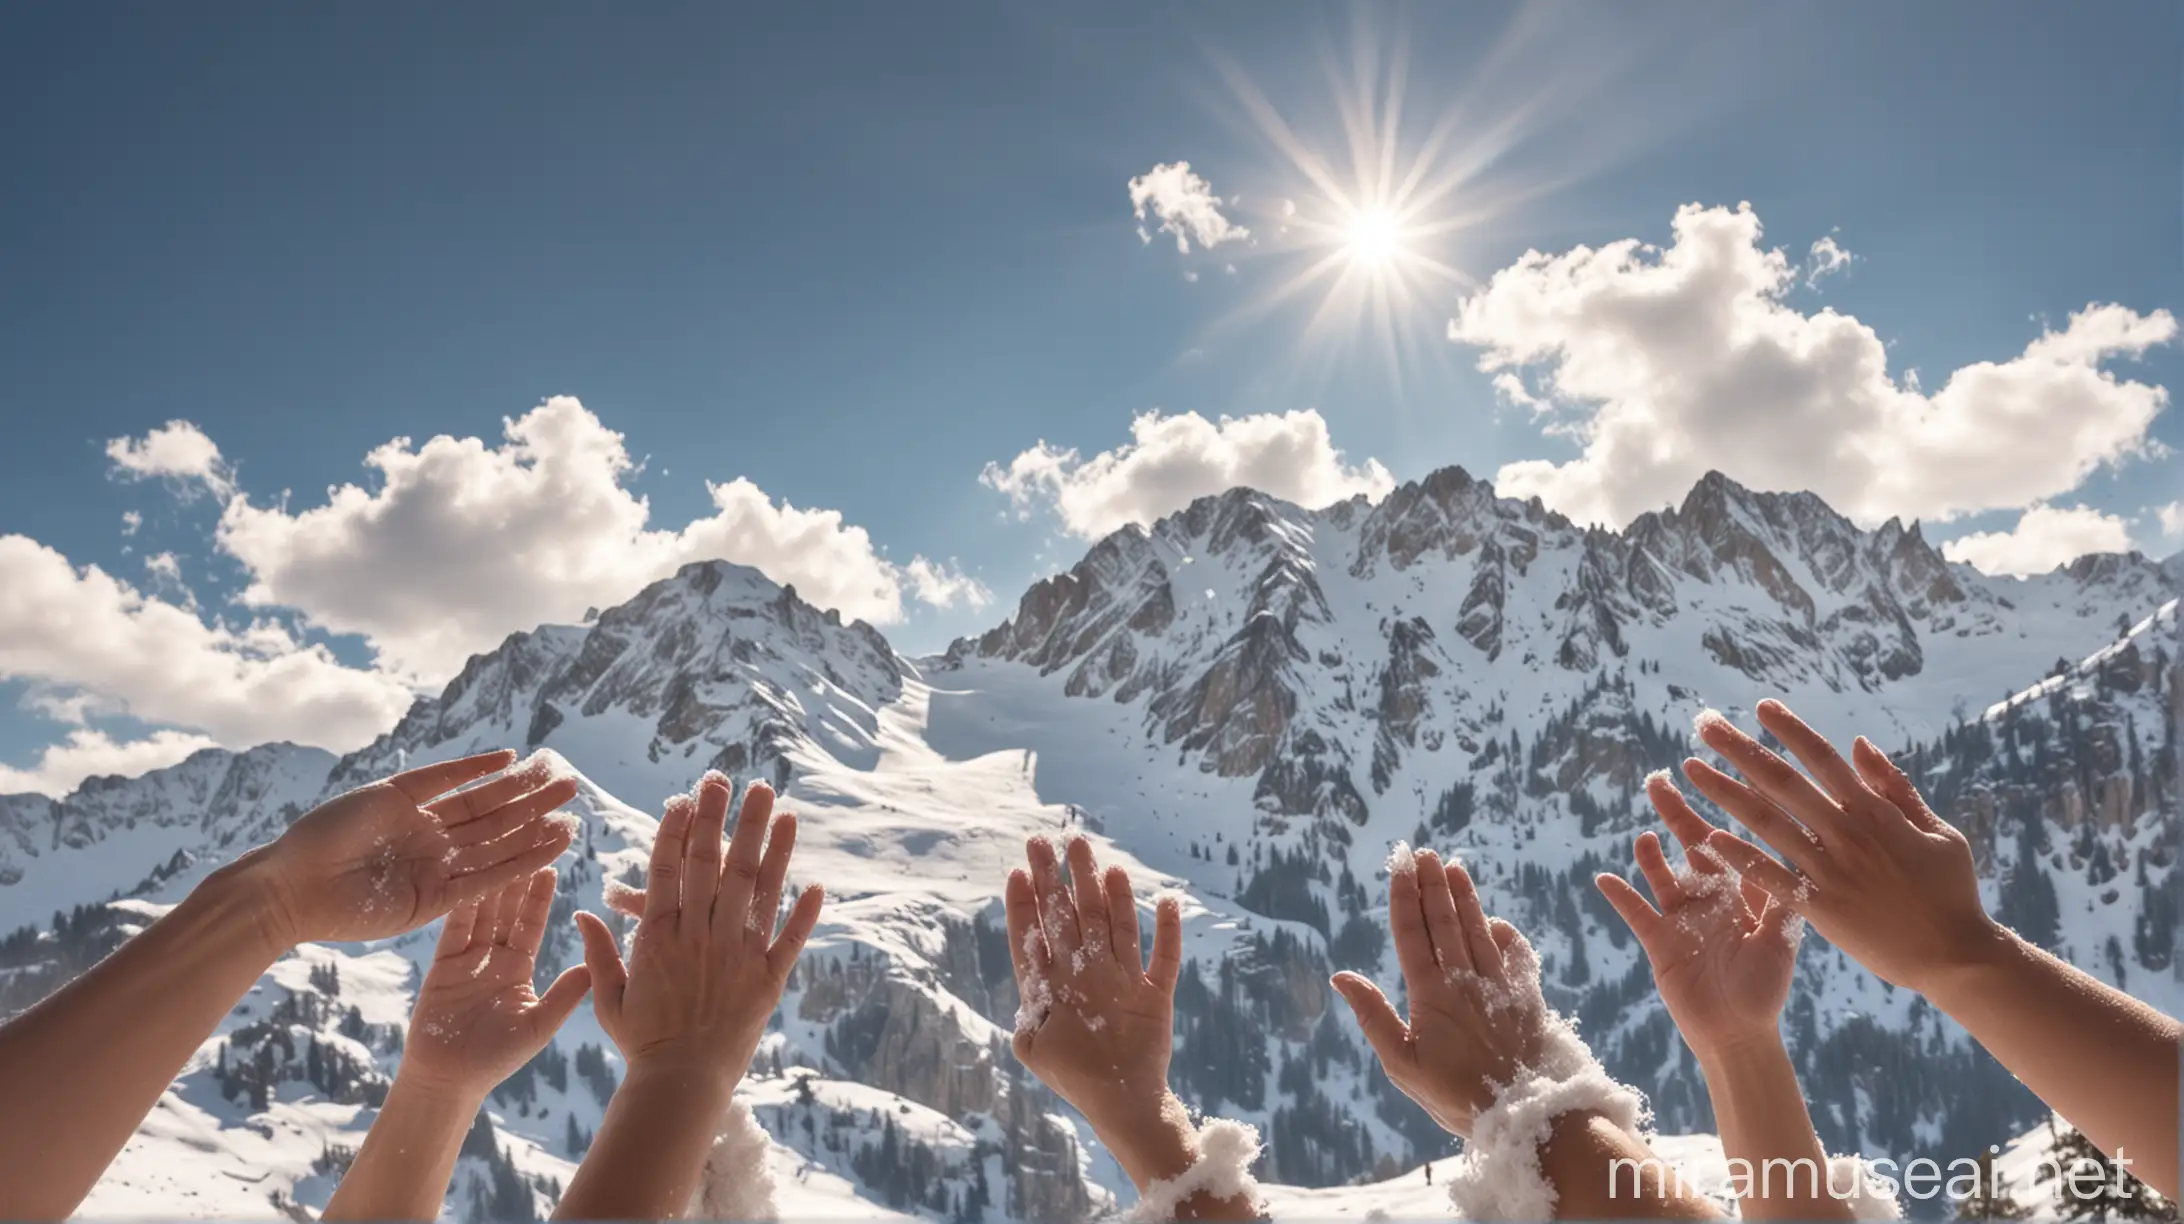 The background of the image is high mountains covered with white snow, a blue sky with small clouds passing by and sunlight shining on the mountain tops. This scene is blurred.

In front are 5 hands holding each other tightly towards the sky, each hand is a different skin color